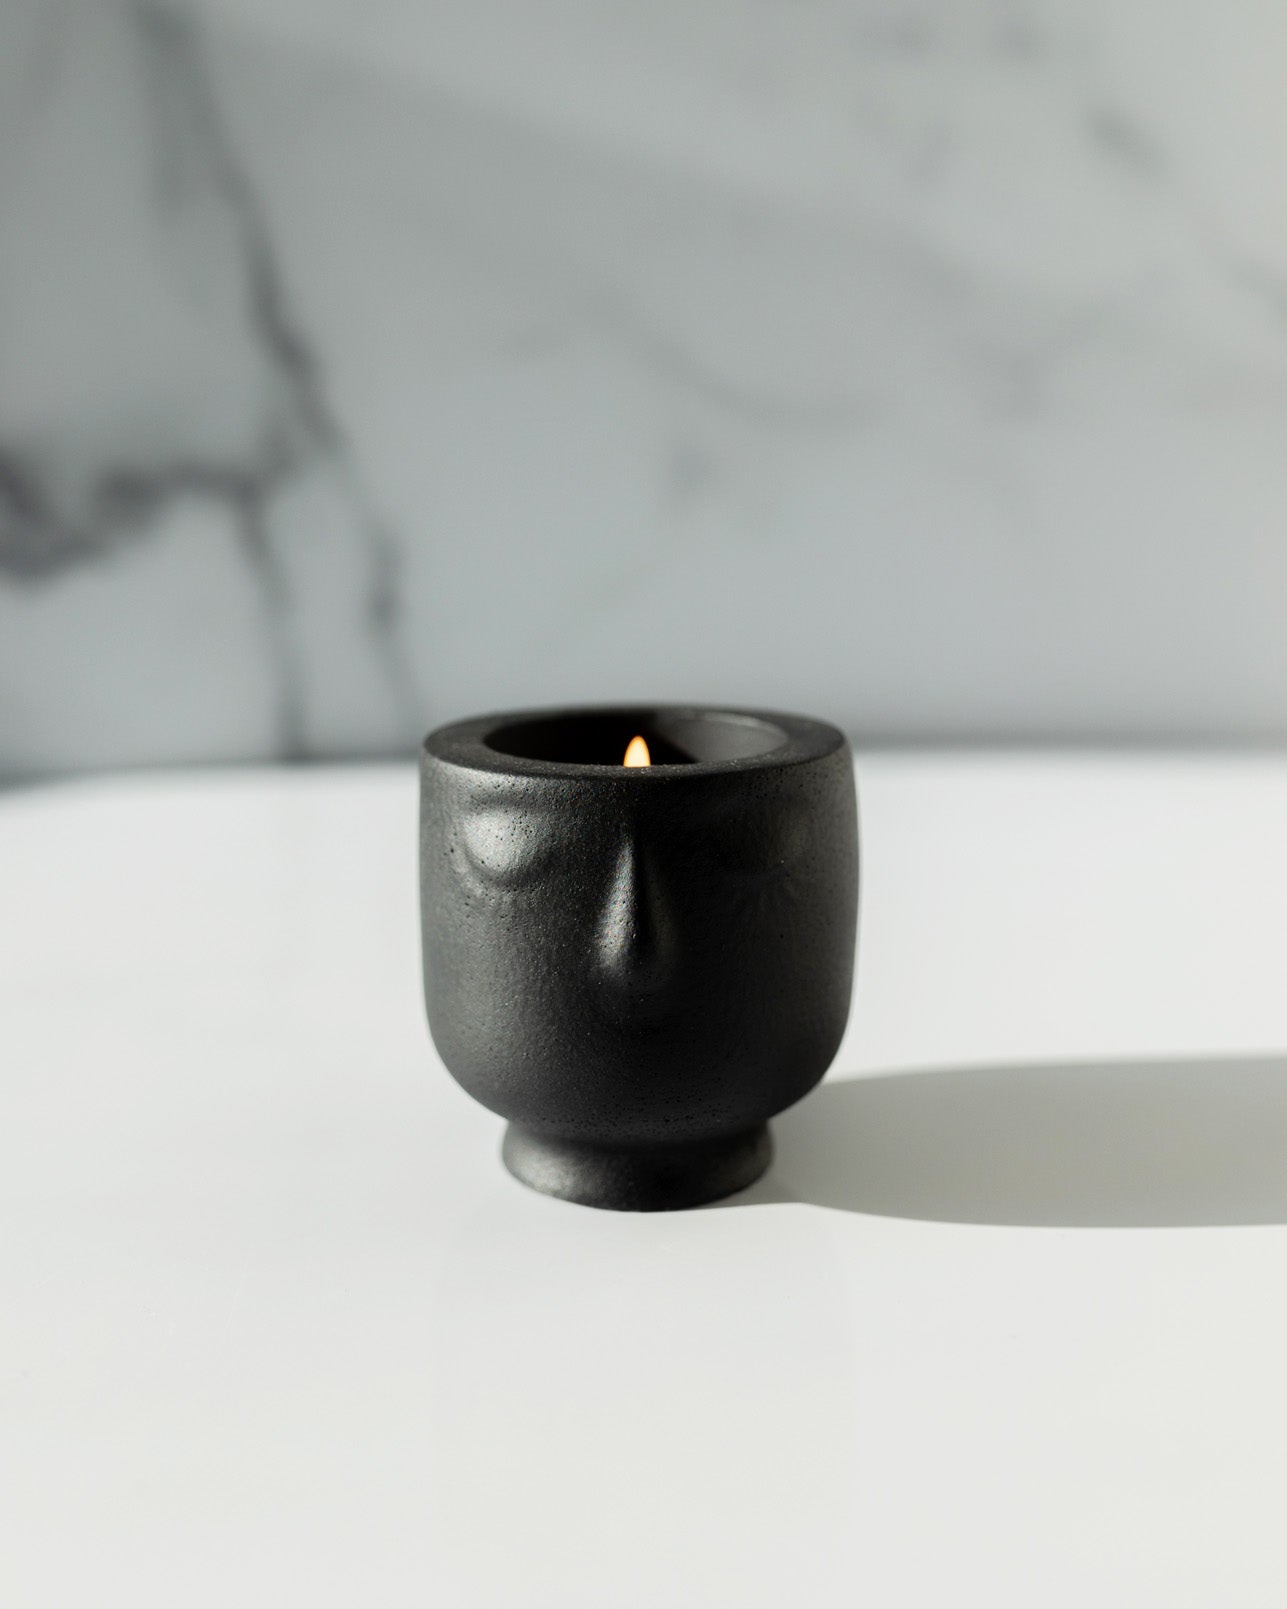 Roses On My Mind Coconut Soy Candle -  Modern Face Vessel Noir